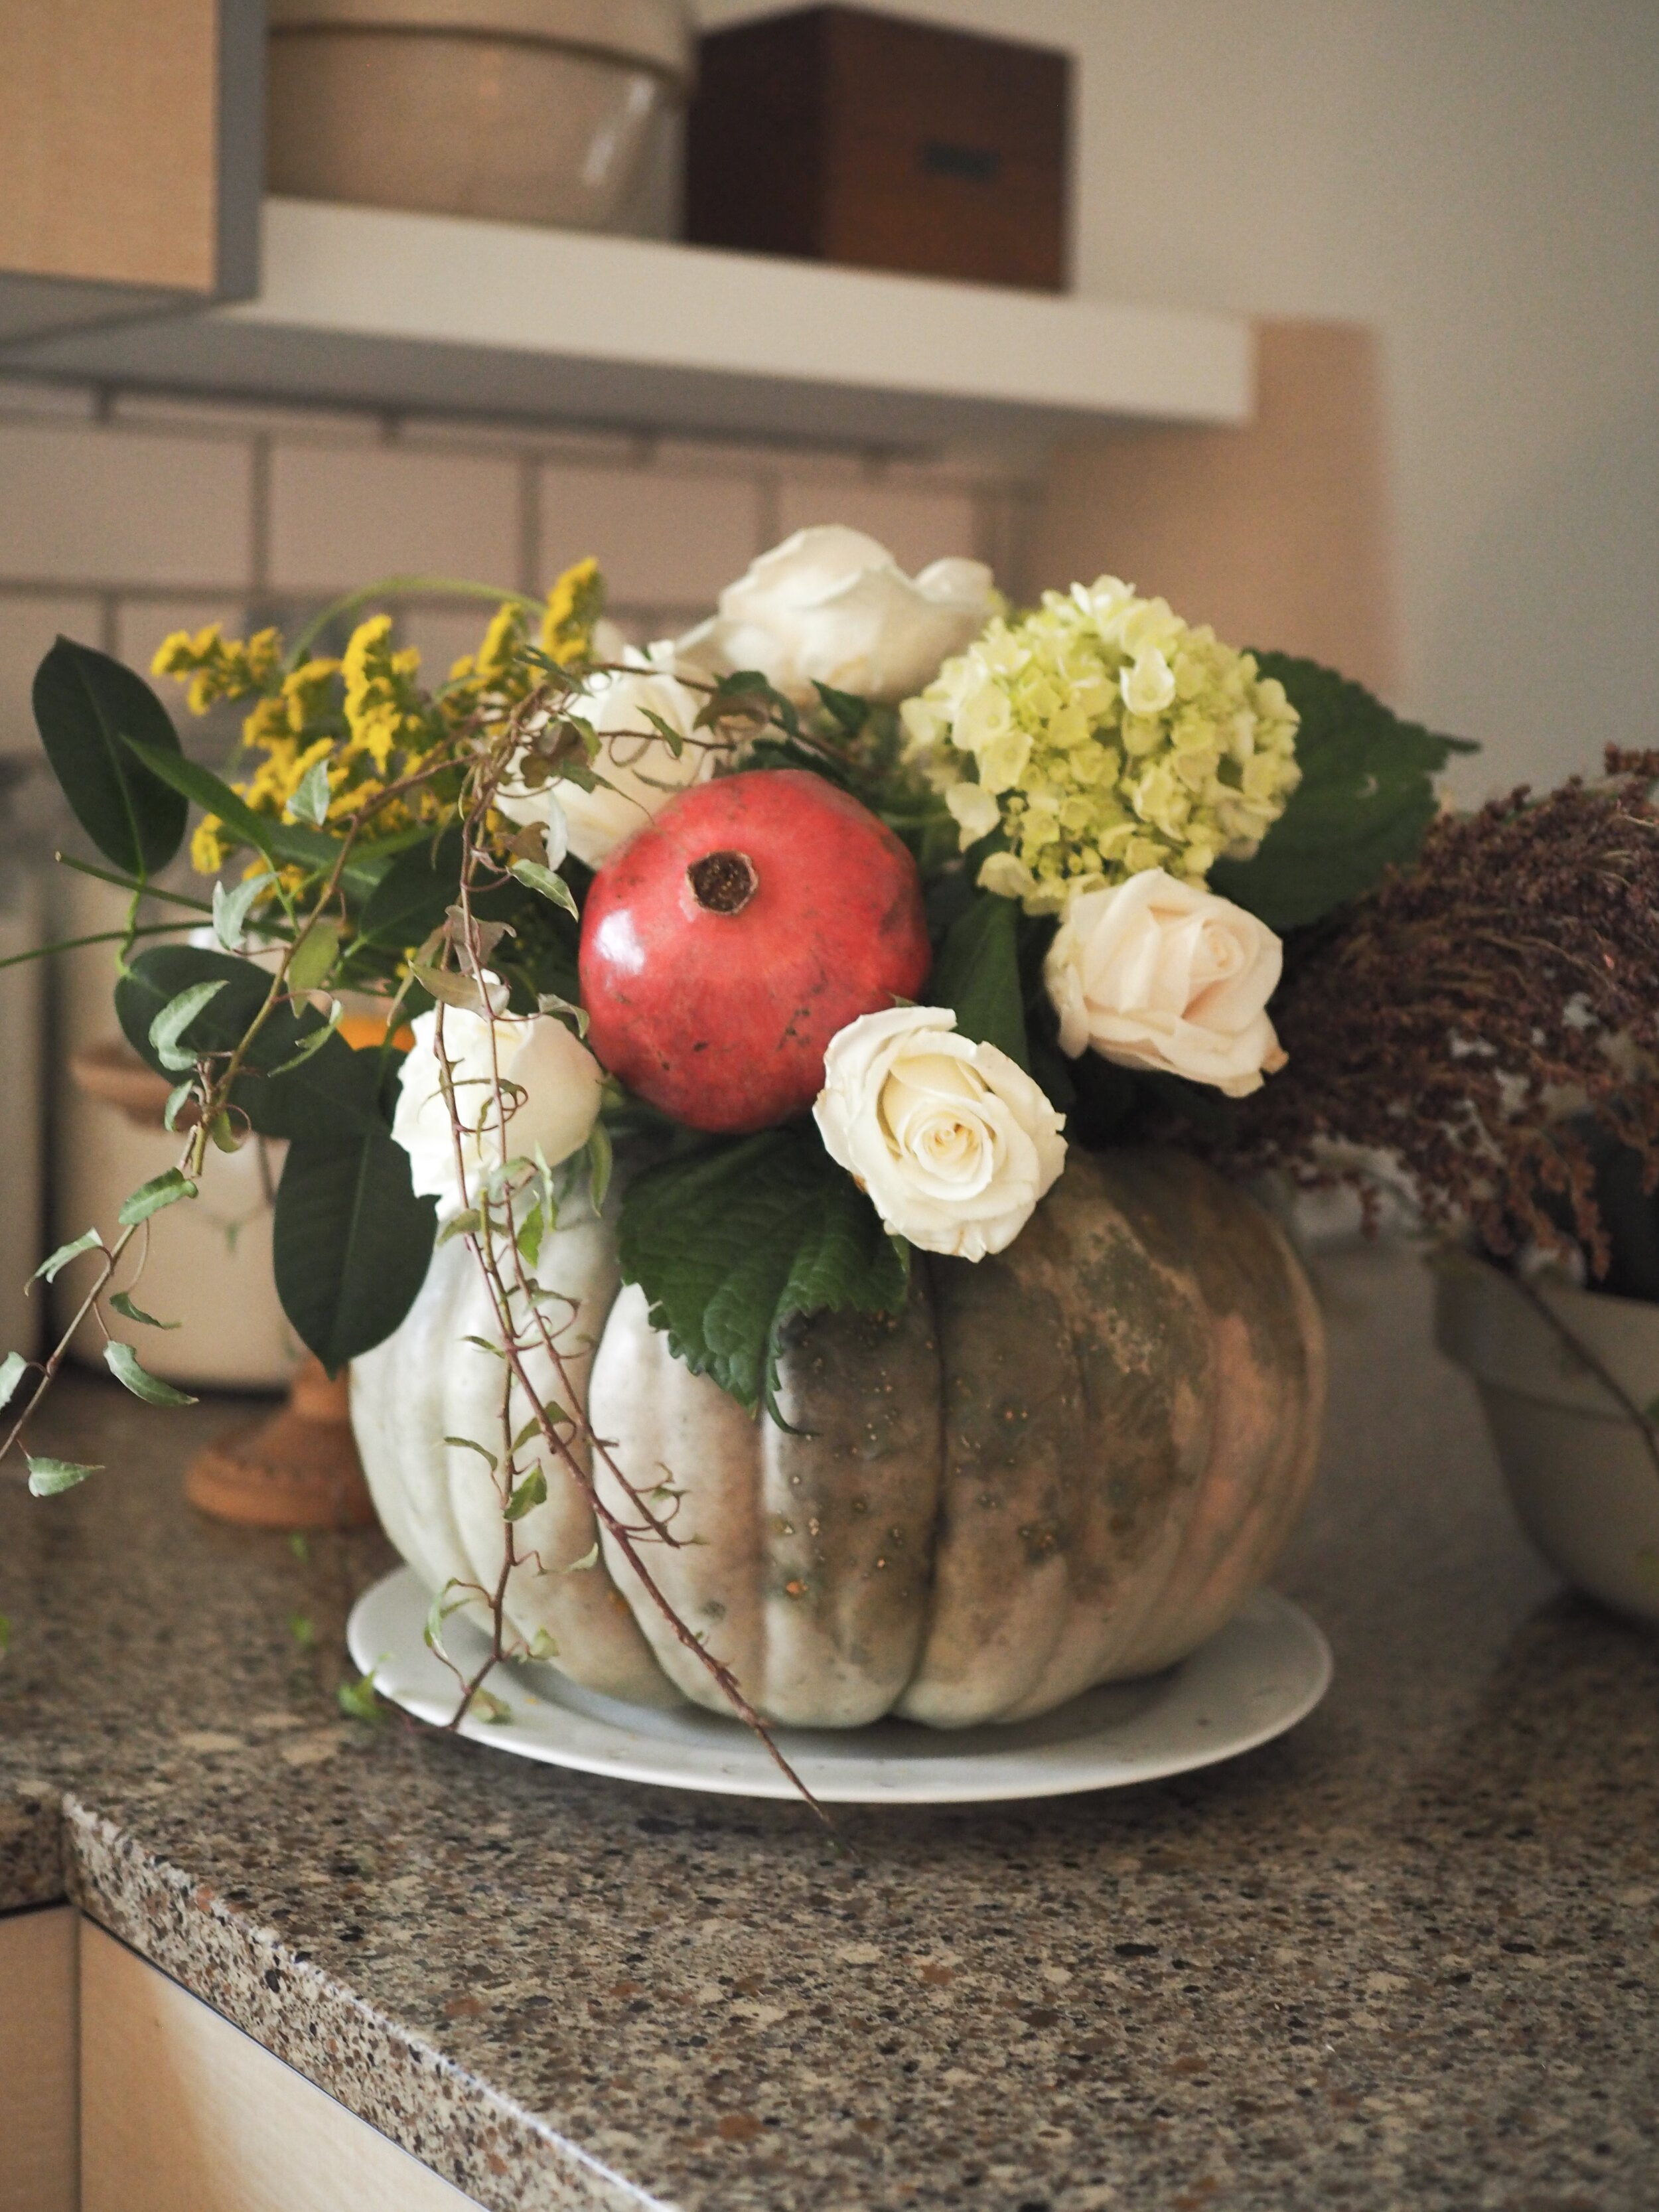 Once of the larger, Cinderella pumpkin centerpieces